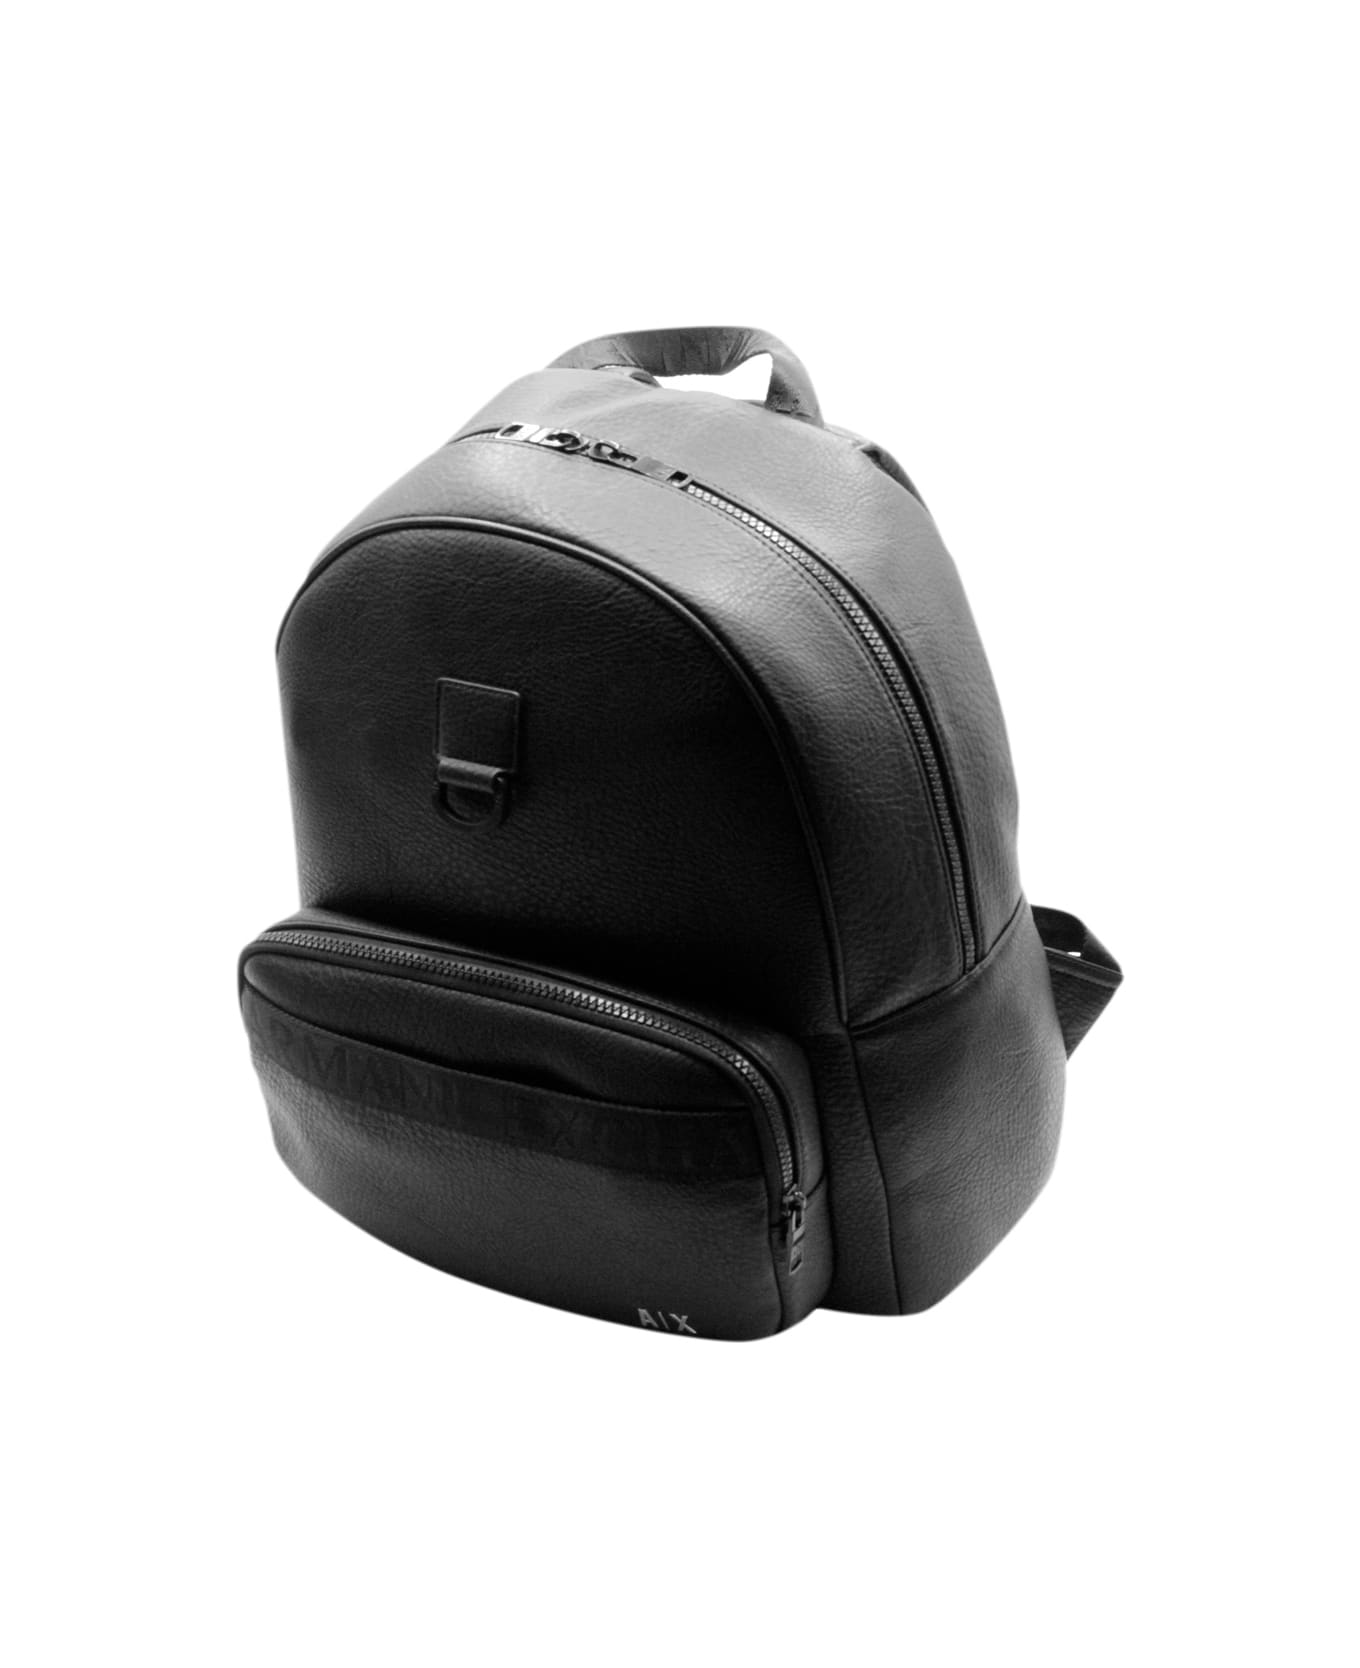 Armani Collezioni Backpack In Very Soft Soft Grain Eco-leather With Logo Written On The Front. Adjustable Shoulder Straps. Measures 38x32x12 Cm - Black